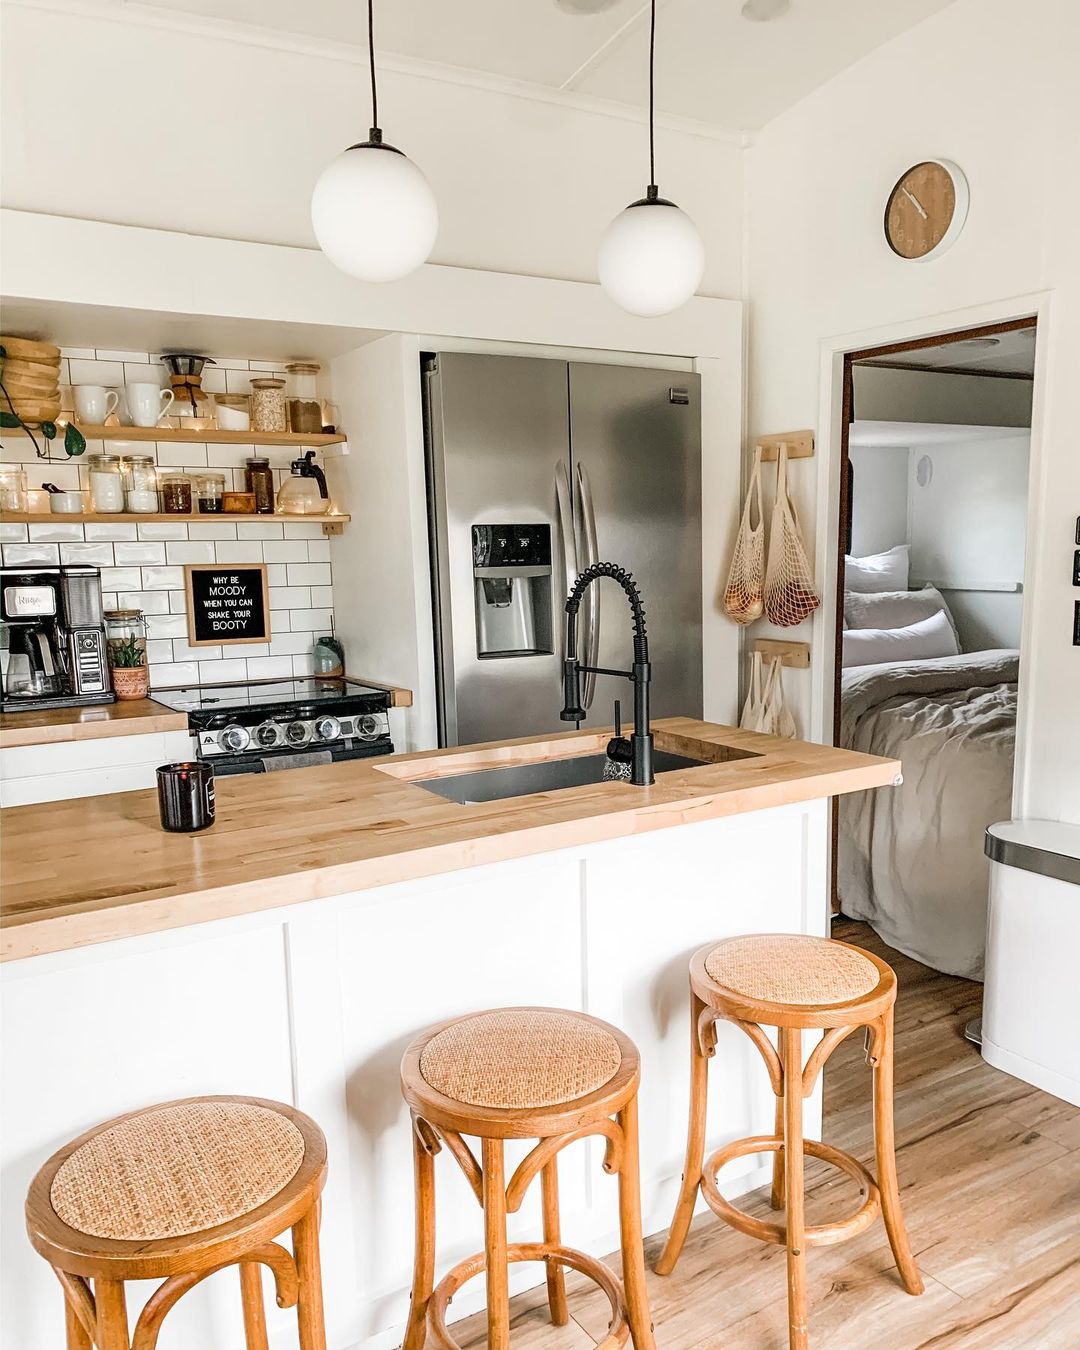 Breakfast bar also used as kitchen island, and a view of the full kitchen and master bedroom in an RV. Photo by Instagram user @laceyautumnbrooke.